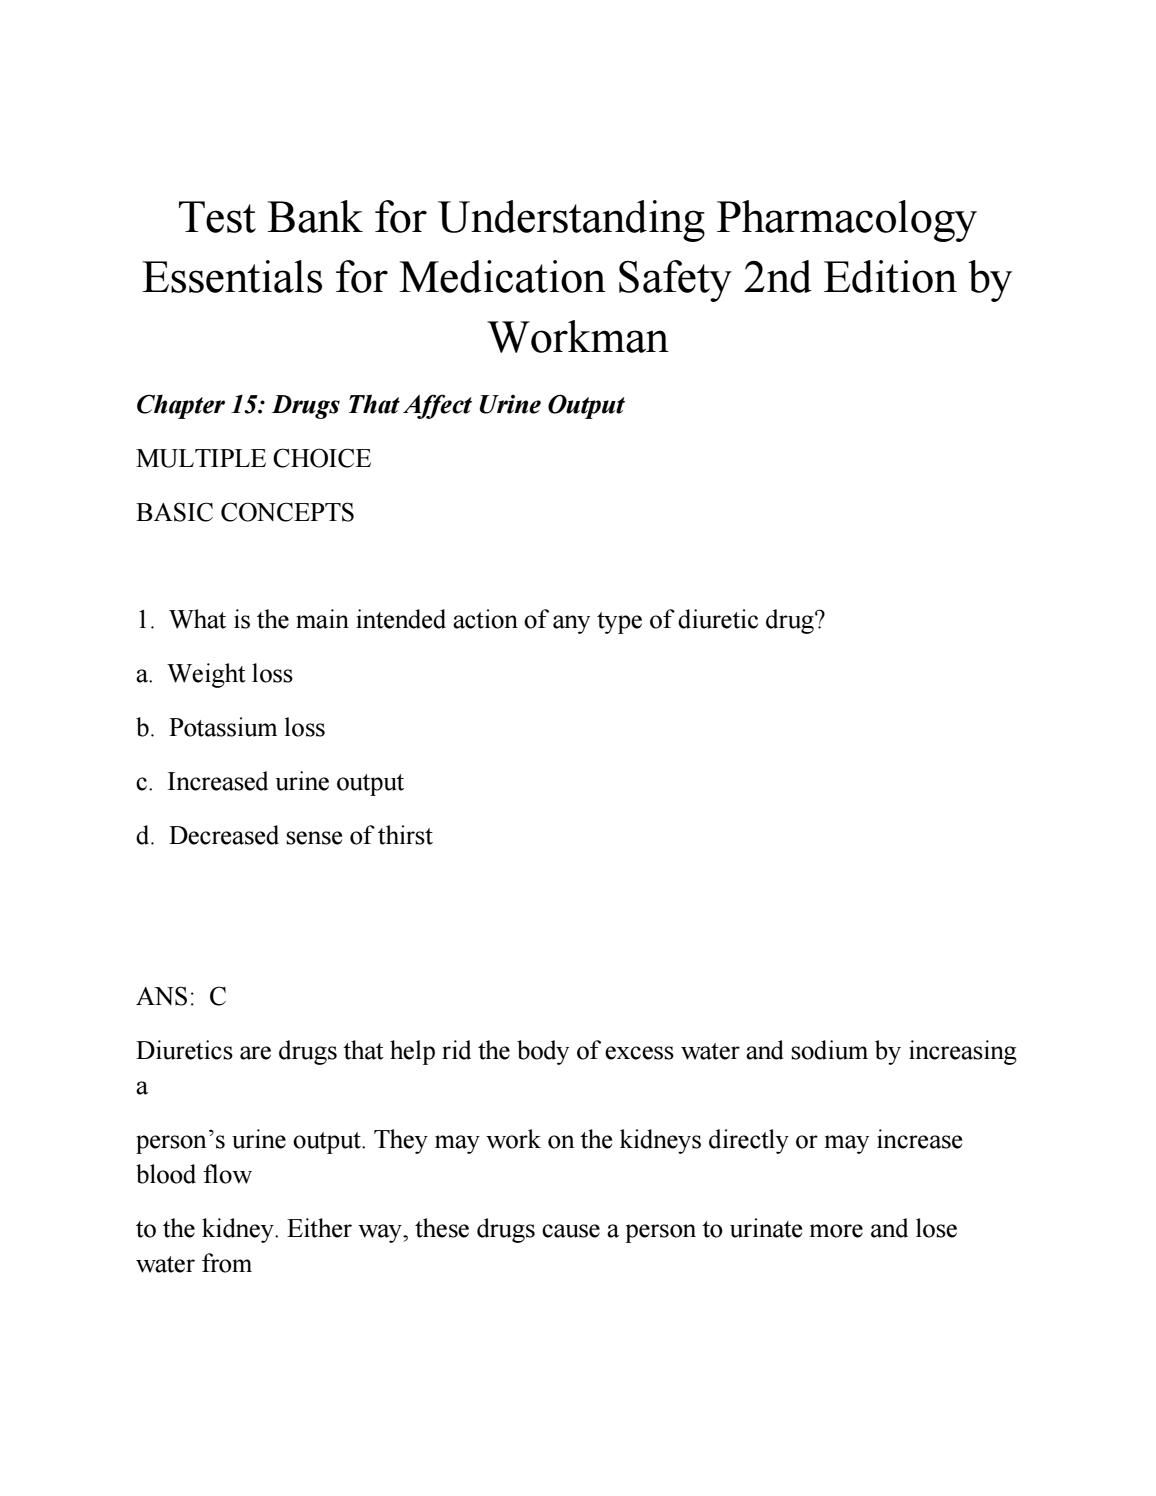 Understanding Pharmacology Study Guide Answer Key entrancementfoot